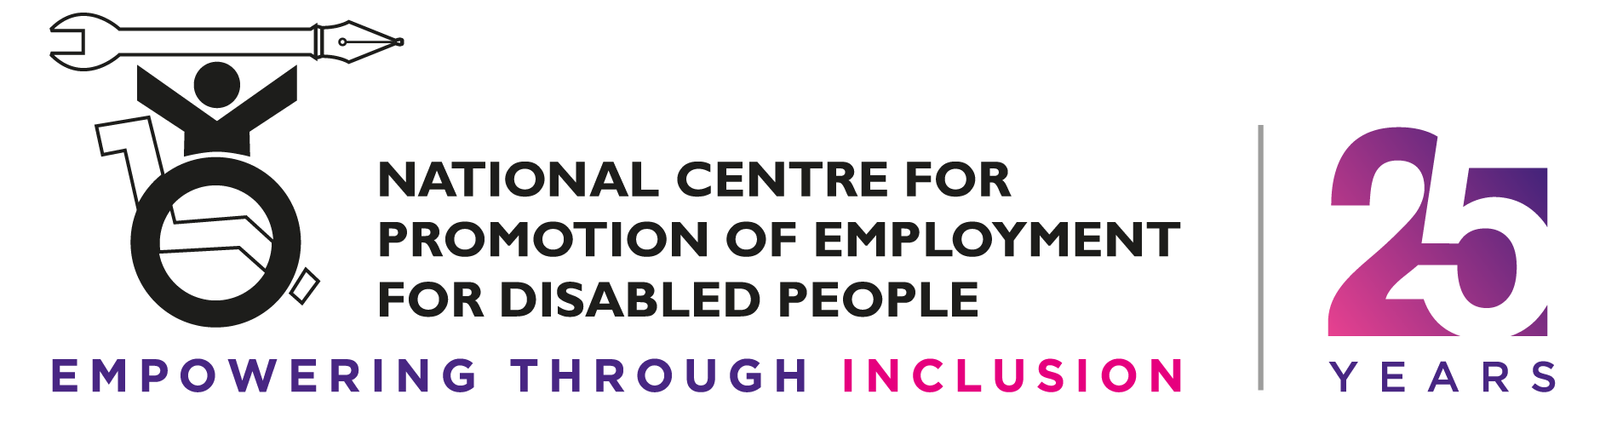 Logo of NCPECP with a wheelchair clipart in black and white on left. The text "National Centre for Promotion of Employment for Disabled People" in centre and 25 years in pink and purple on right. "Enabling Through Inclusion" written below